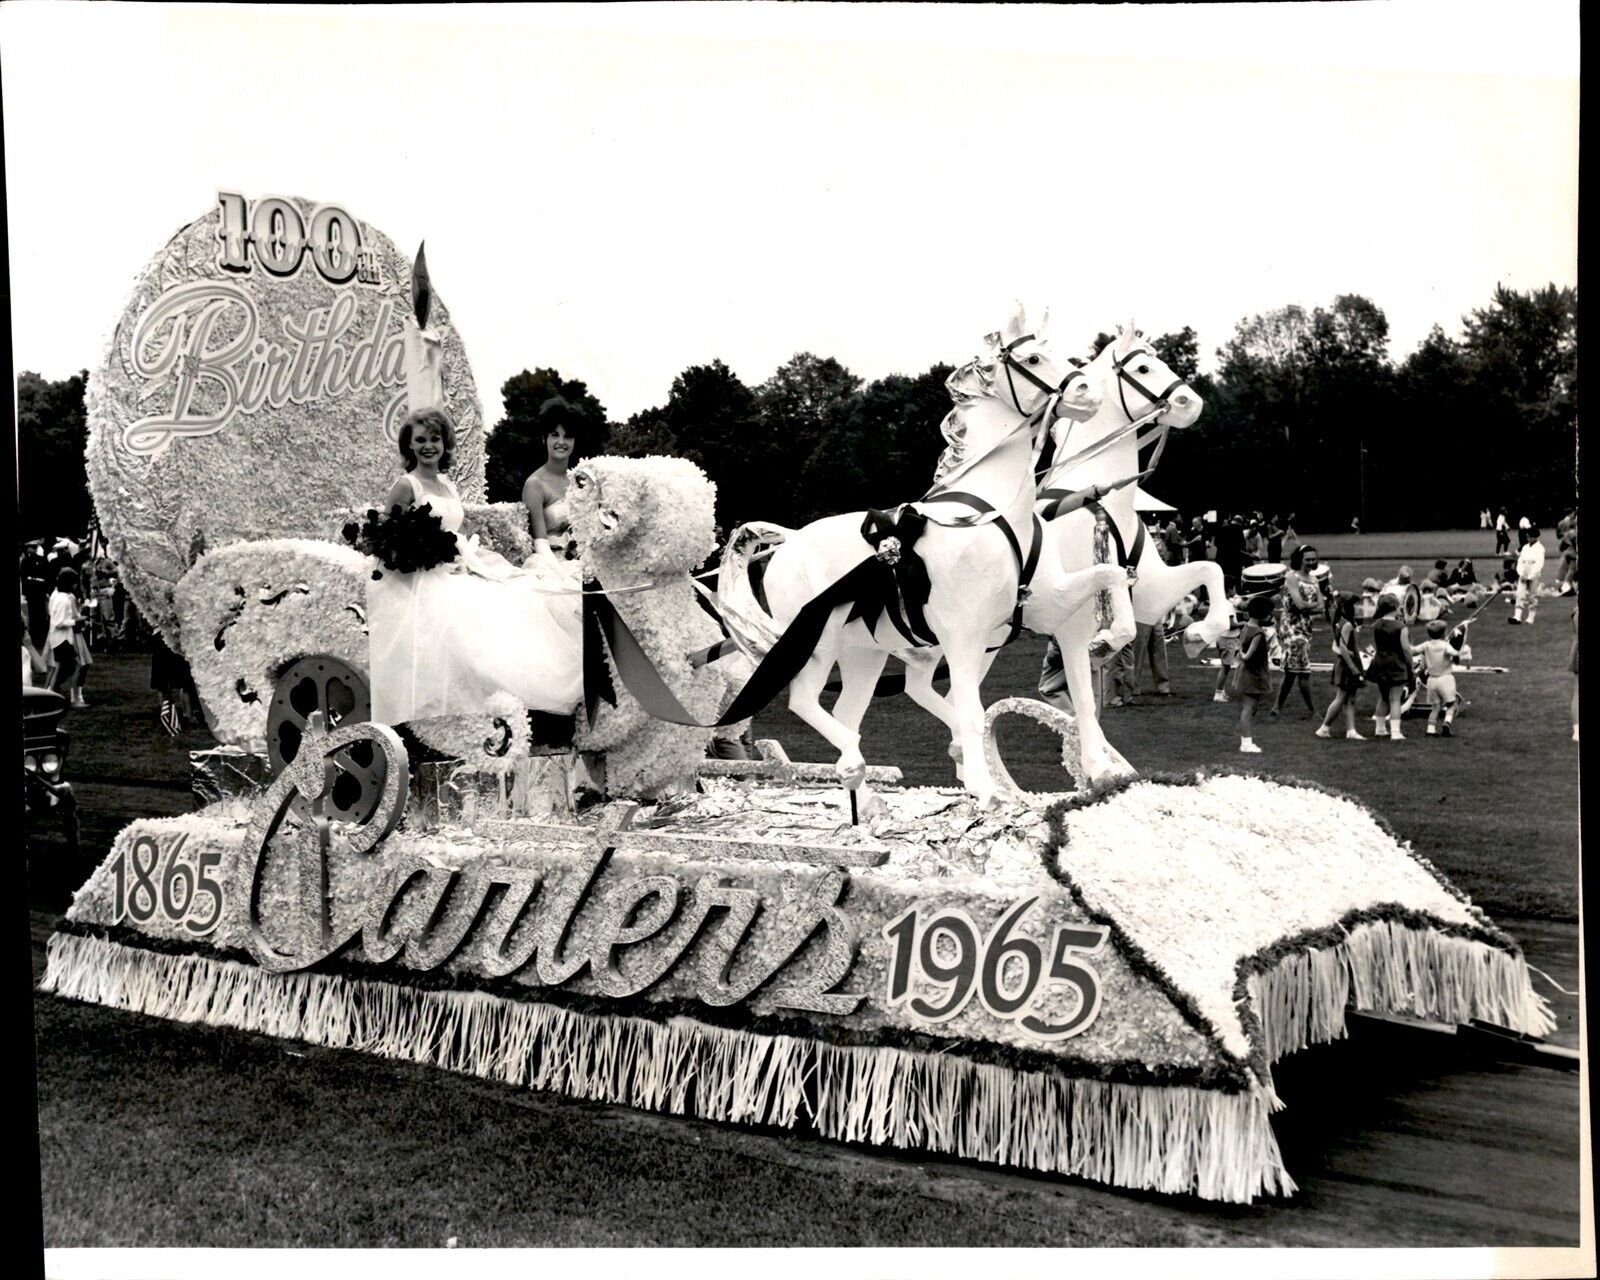 LG56 1965 Original Photo CARTERS 100TH BIRTHDAY PARADE FLOAT PAGEANT MODELS